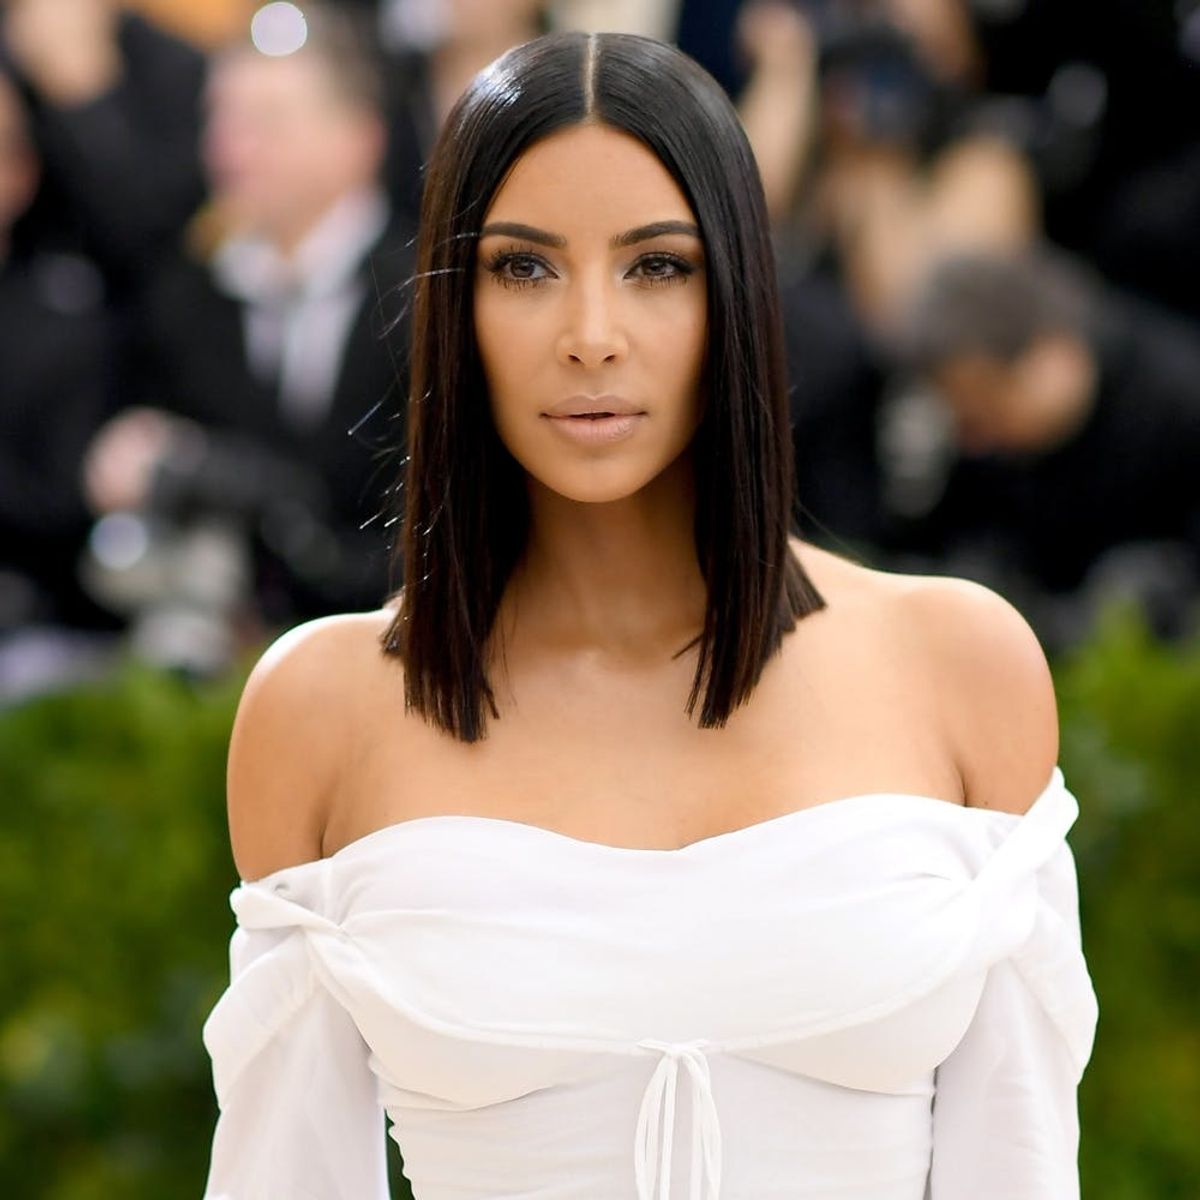 Why Having Kids via Surrogate — Like Kim Kardashian West — Is Complex and Controversial